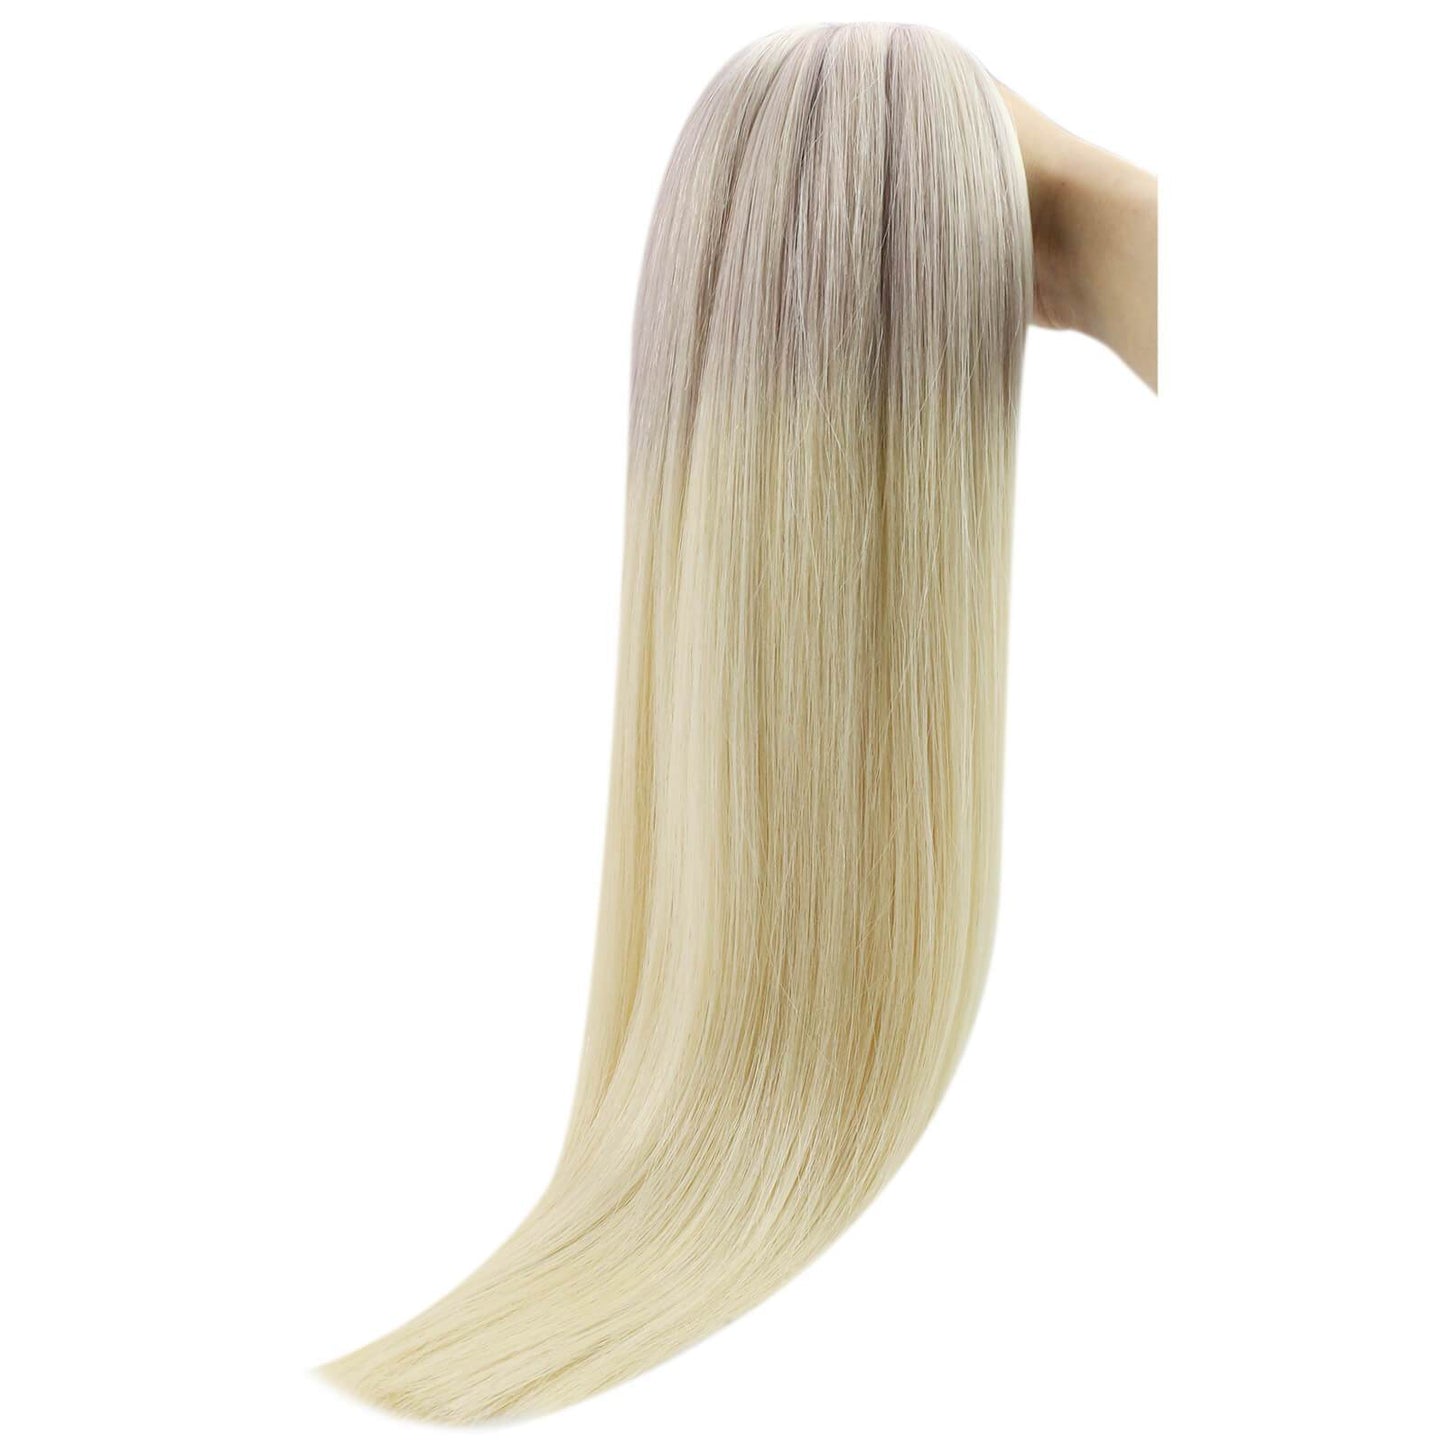 Natural Straight Hair Extensions Sew in Weave Hair Extensions